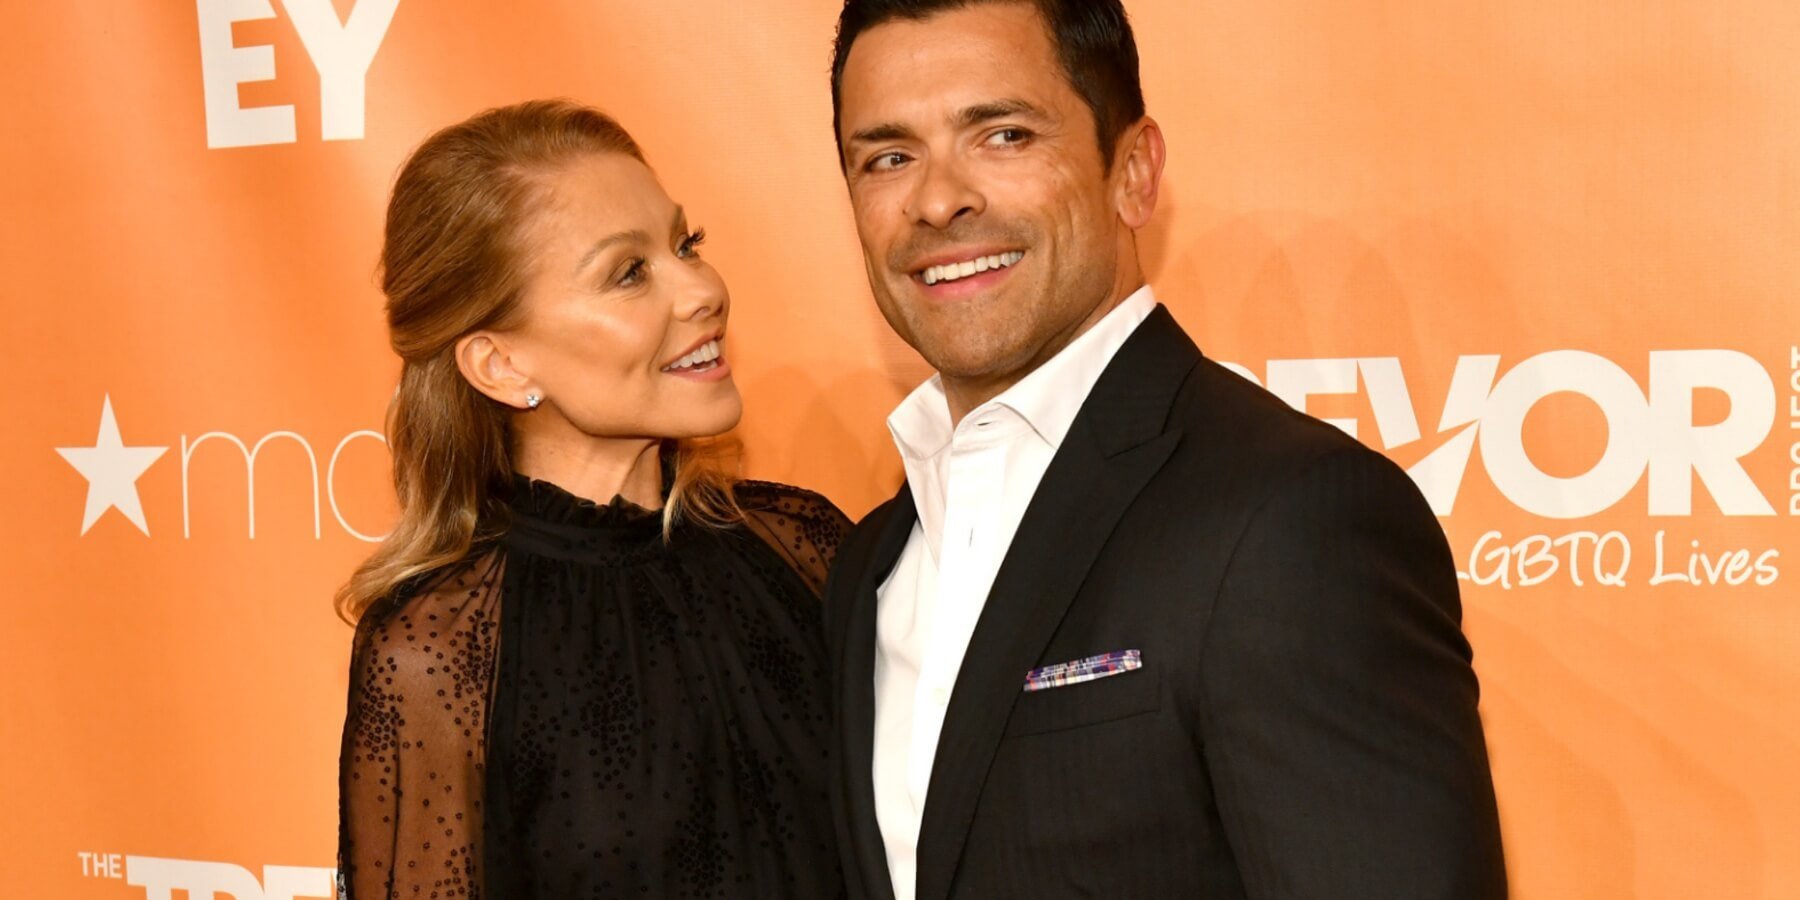 Kelly Ripa and Mark Consuelos photographed in 2019 in New York City.